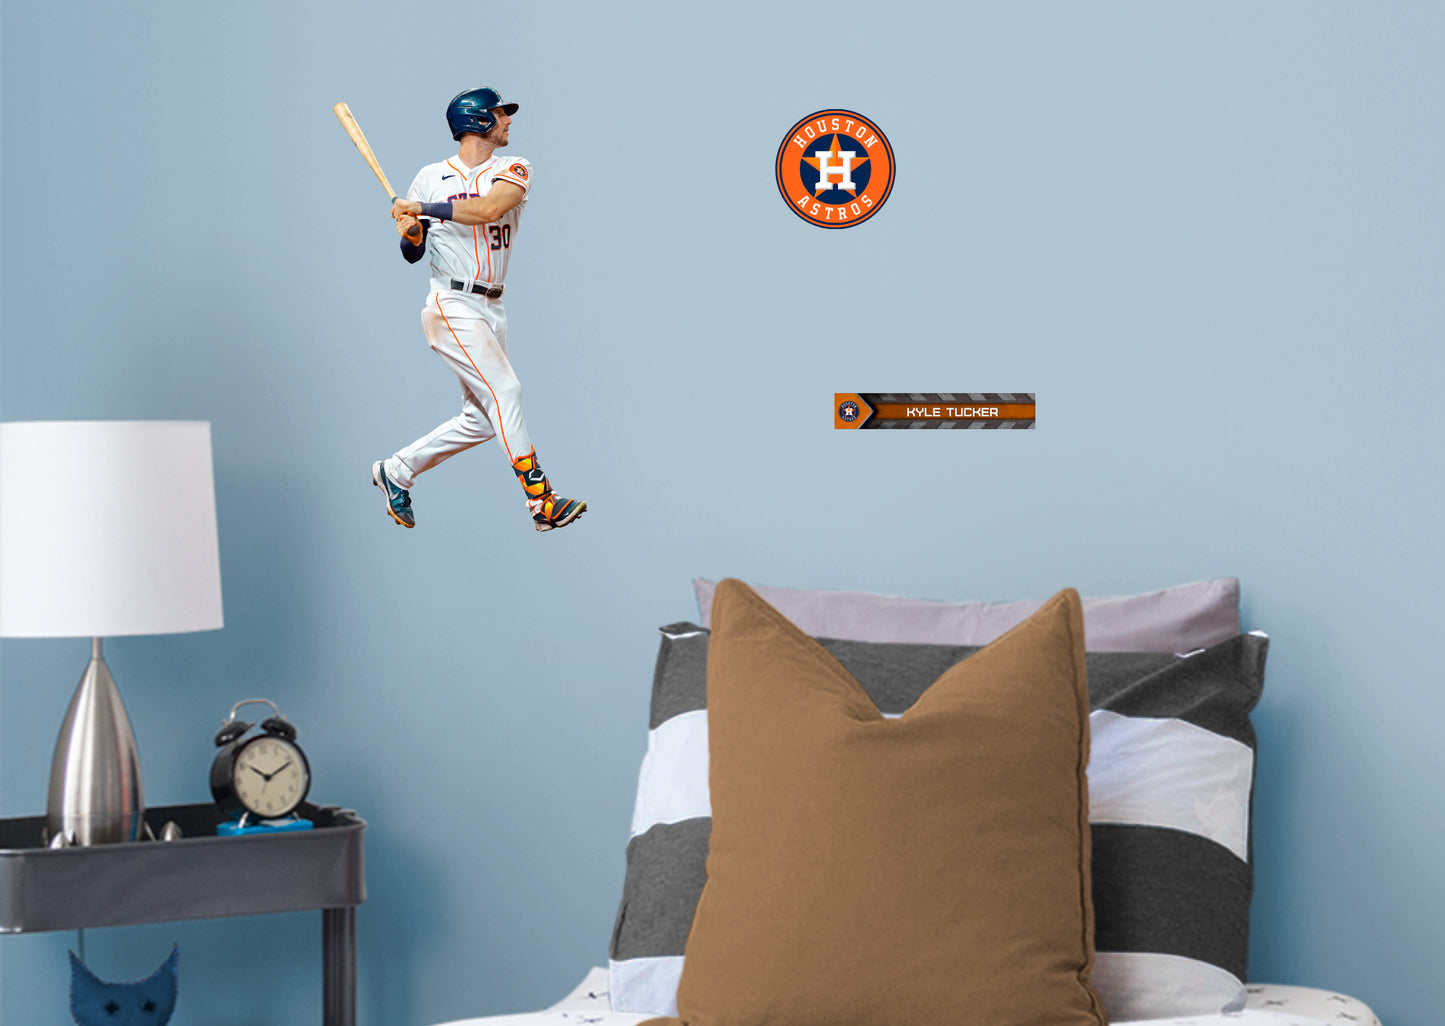 Houston Astros: Kyle Tucker - Officially Licensed MLB Removable Adhesive Decal